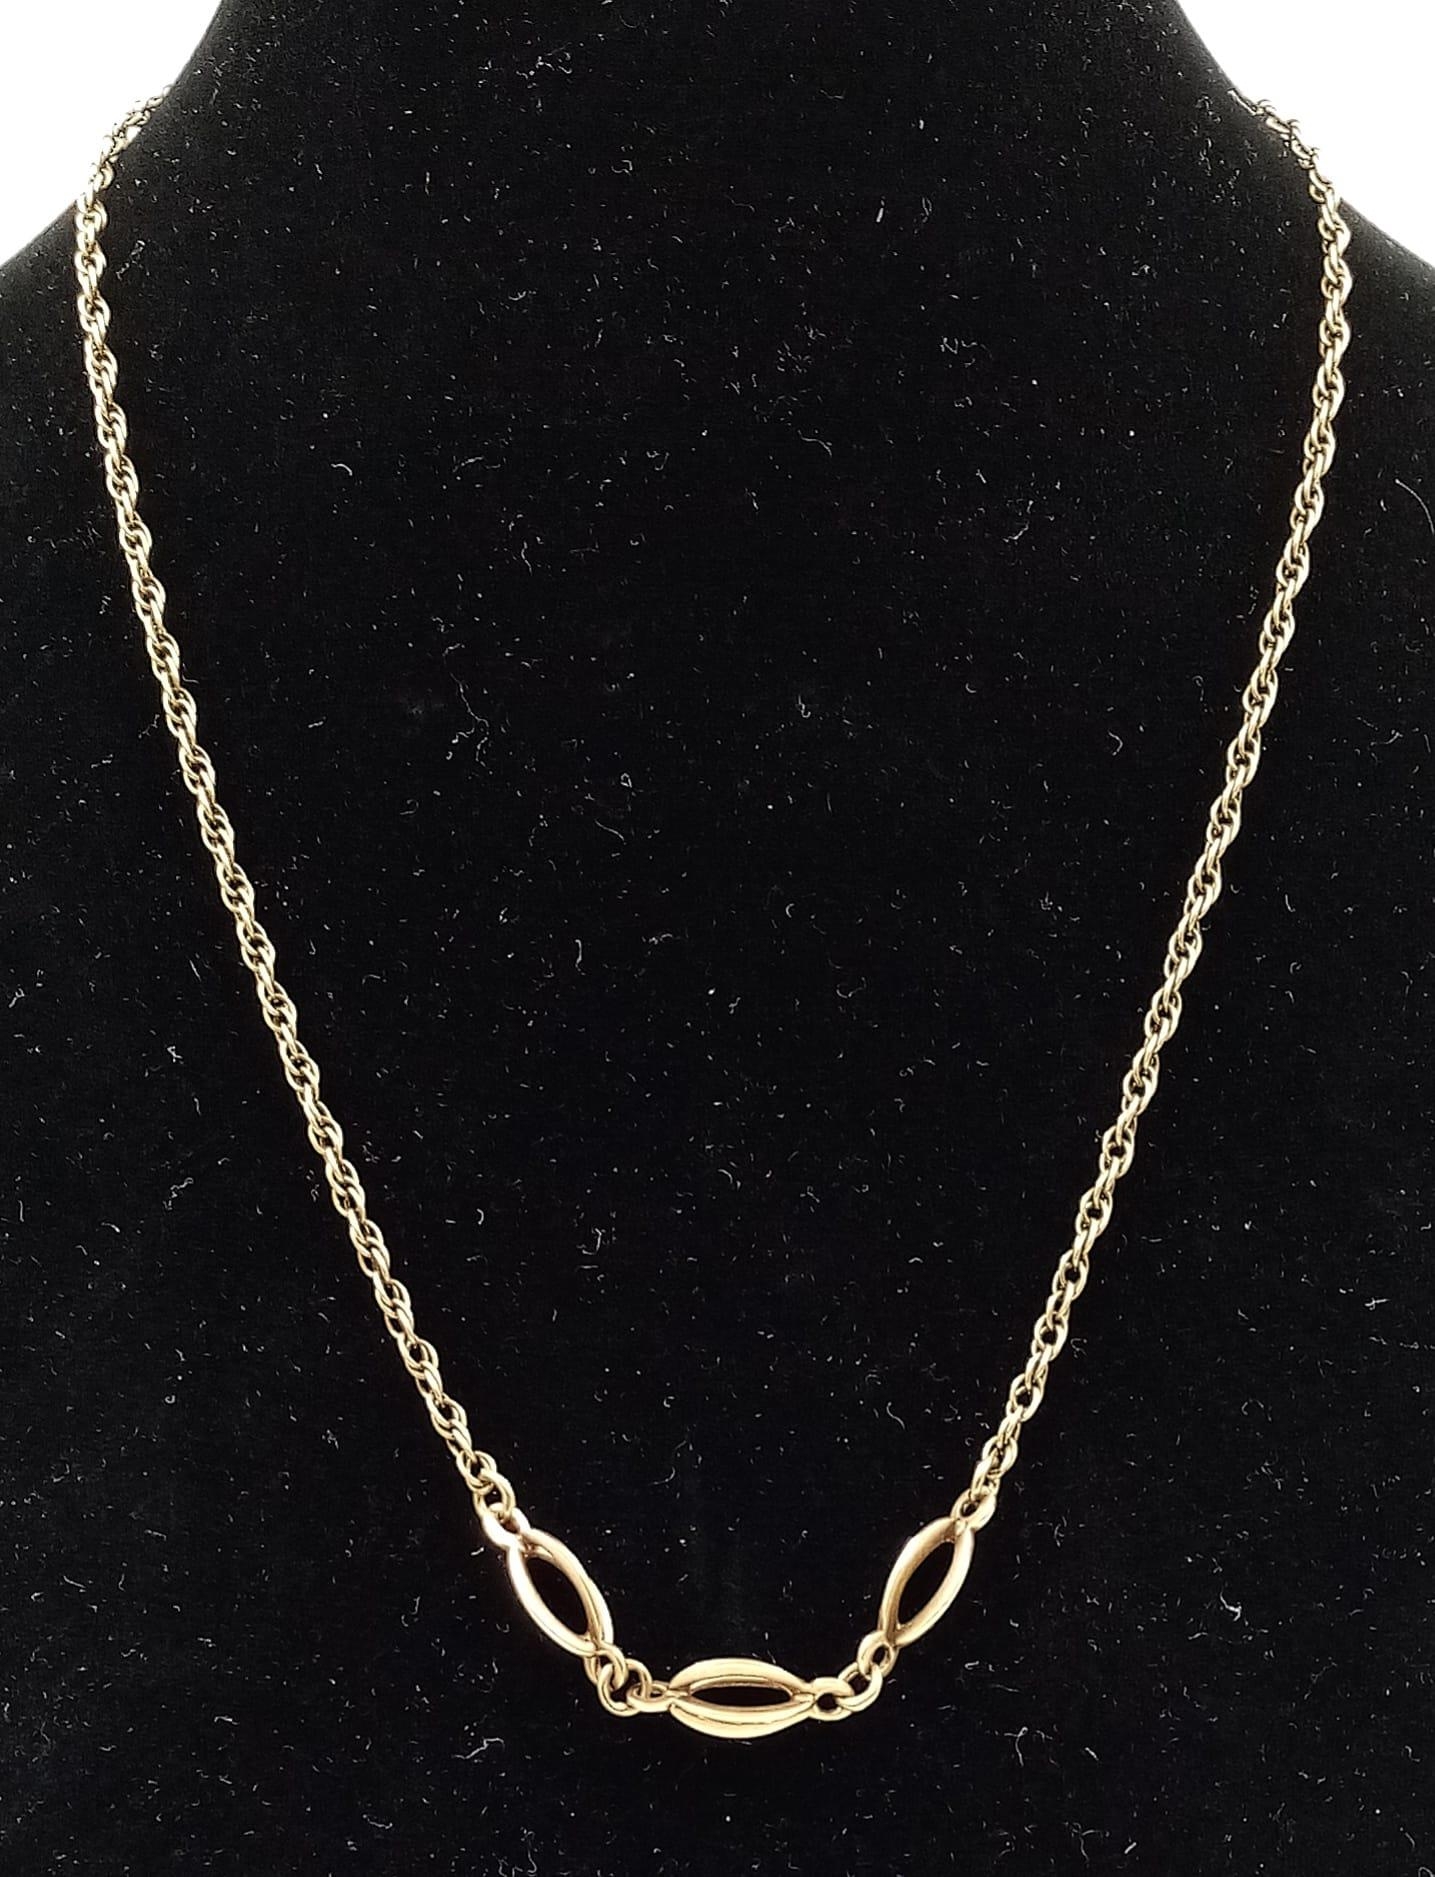 A Vintage 9K Yellow Gold Prince of Wales Link Necklace with Treble-Crossover-Oval Drop Pendant.